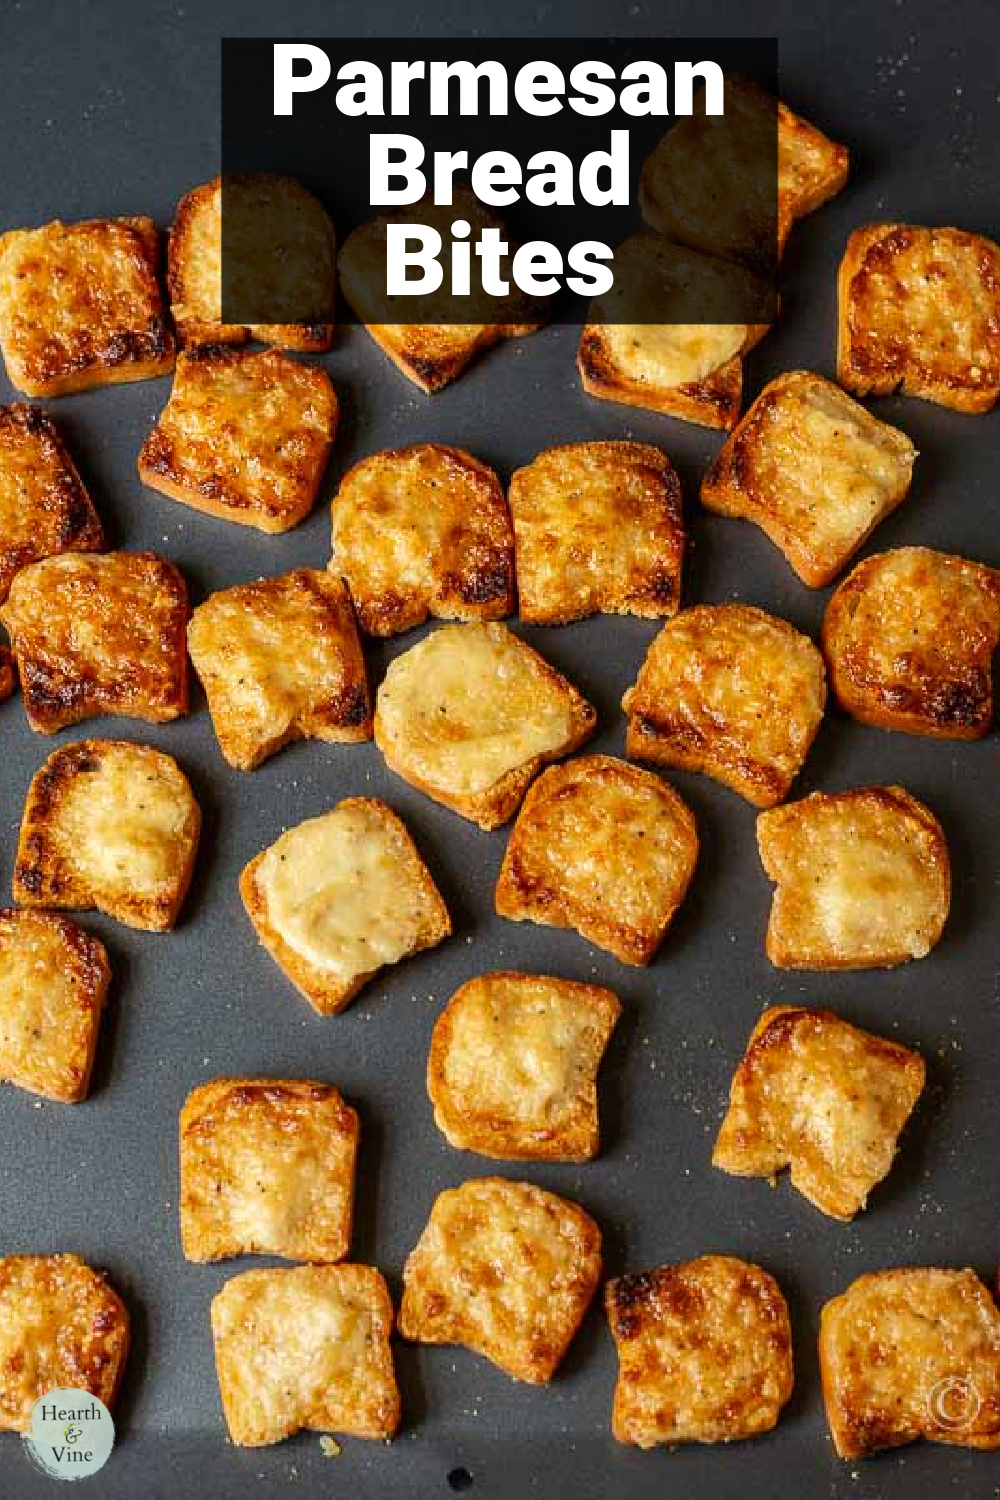 Broiled Parmesan bread bites on a baking sheet.